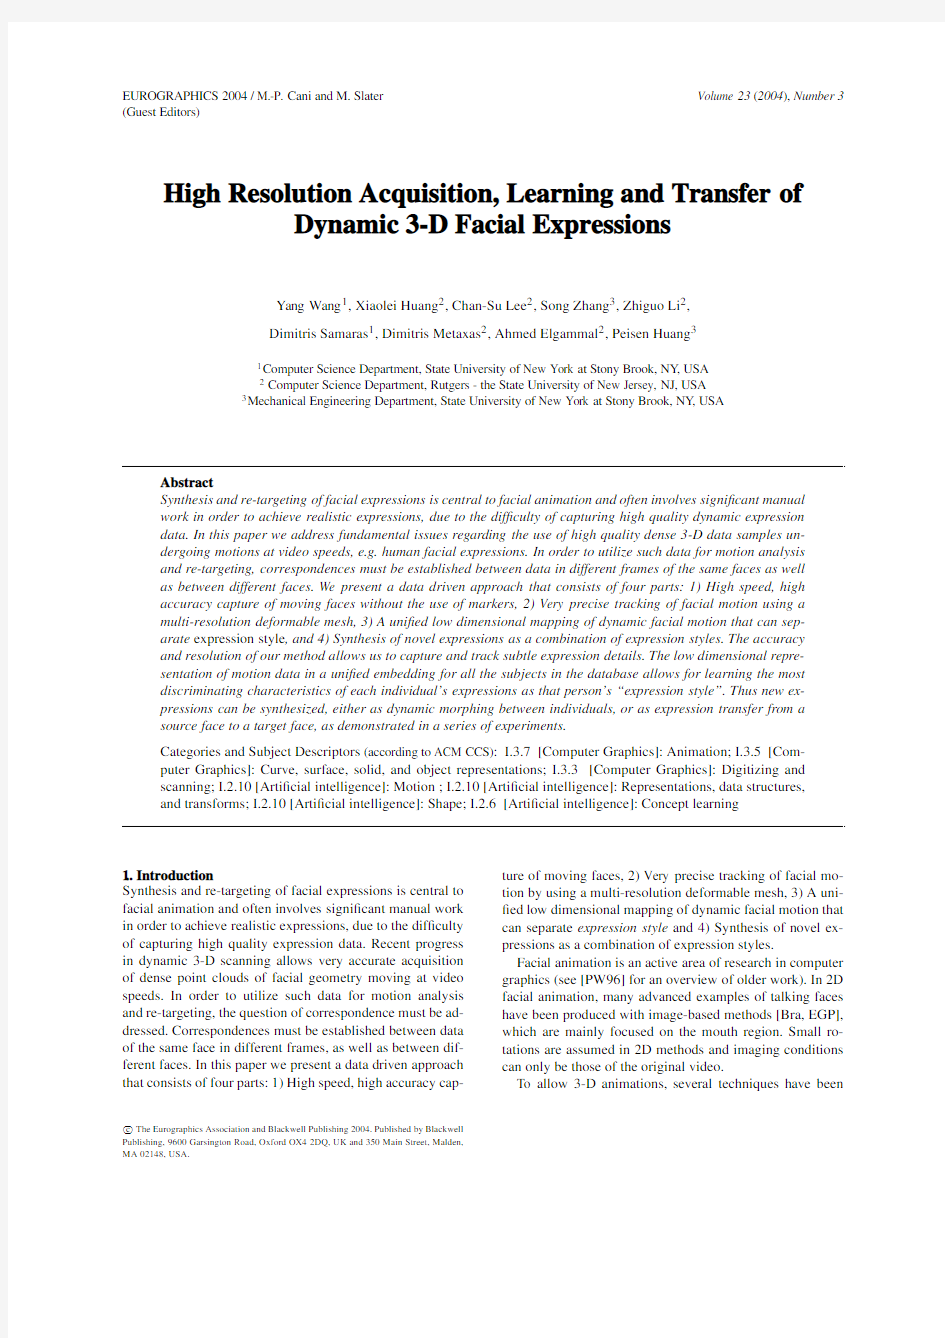 High Resolution Acquisition, Learning and Transfer of Dynamic 3-D Facial Expressions